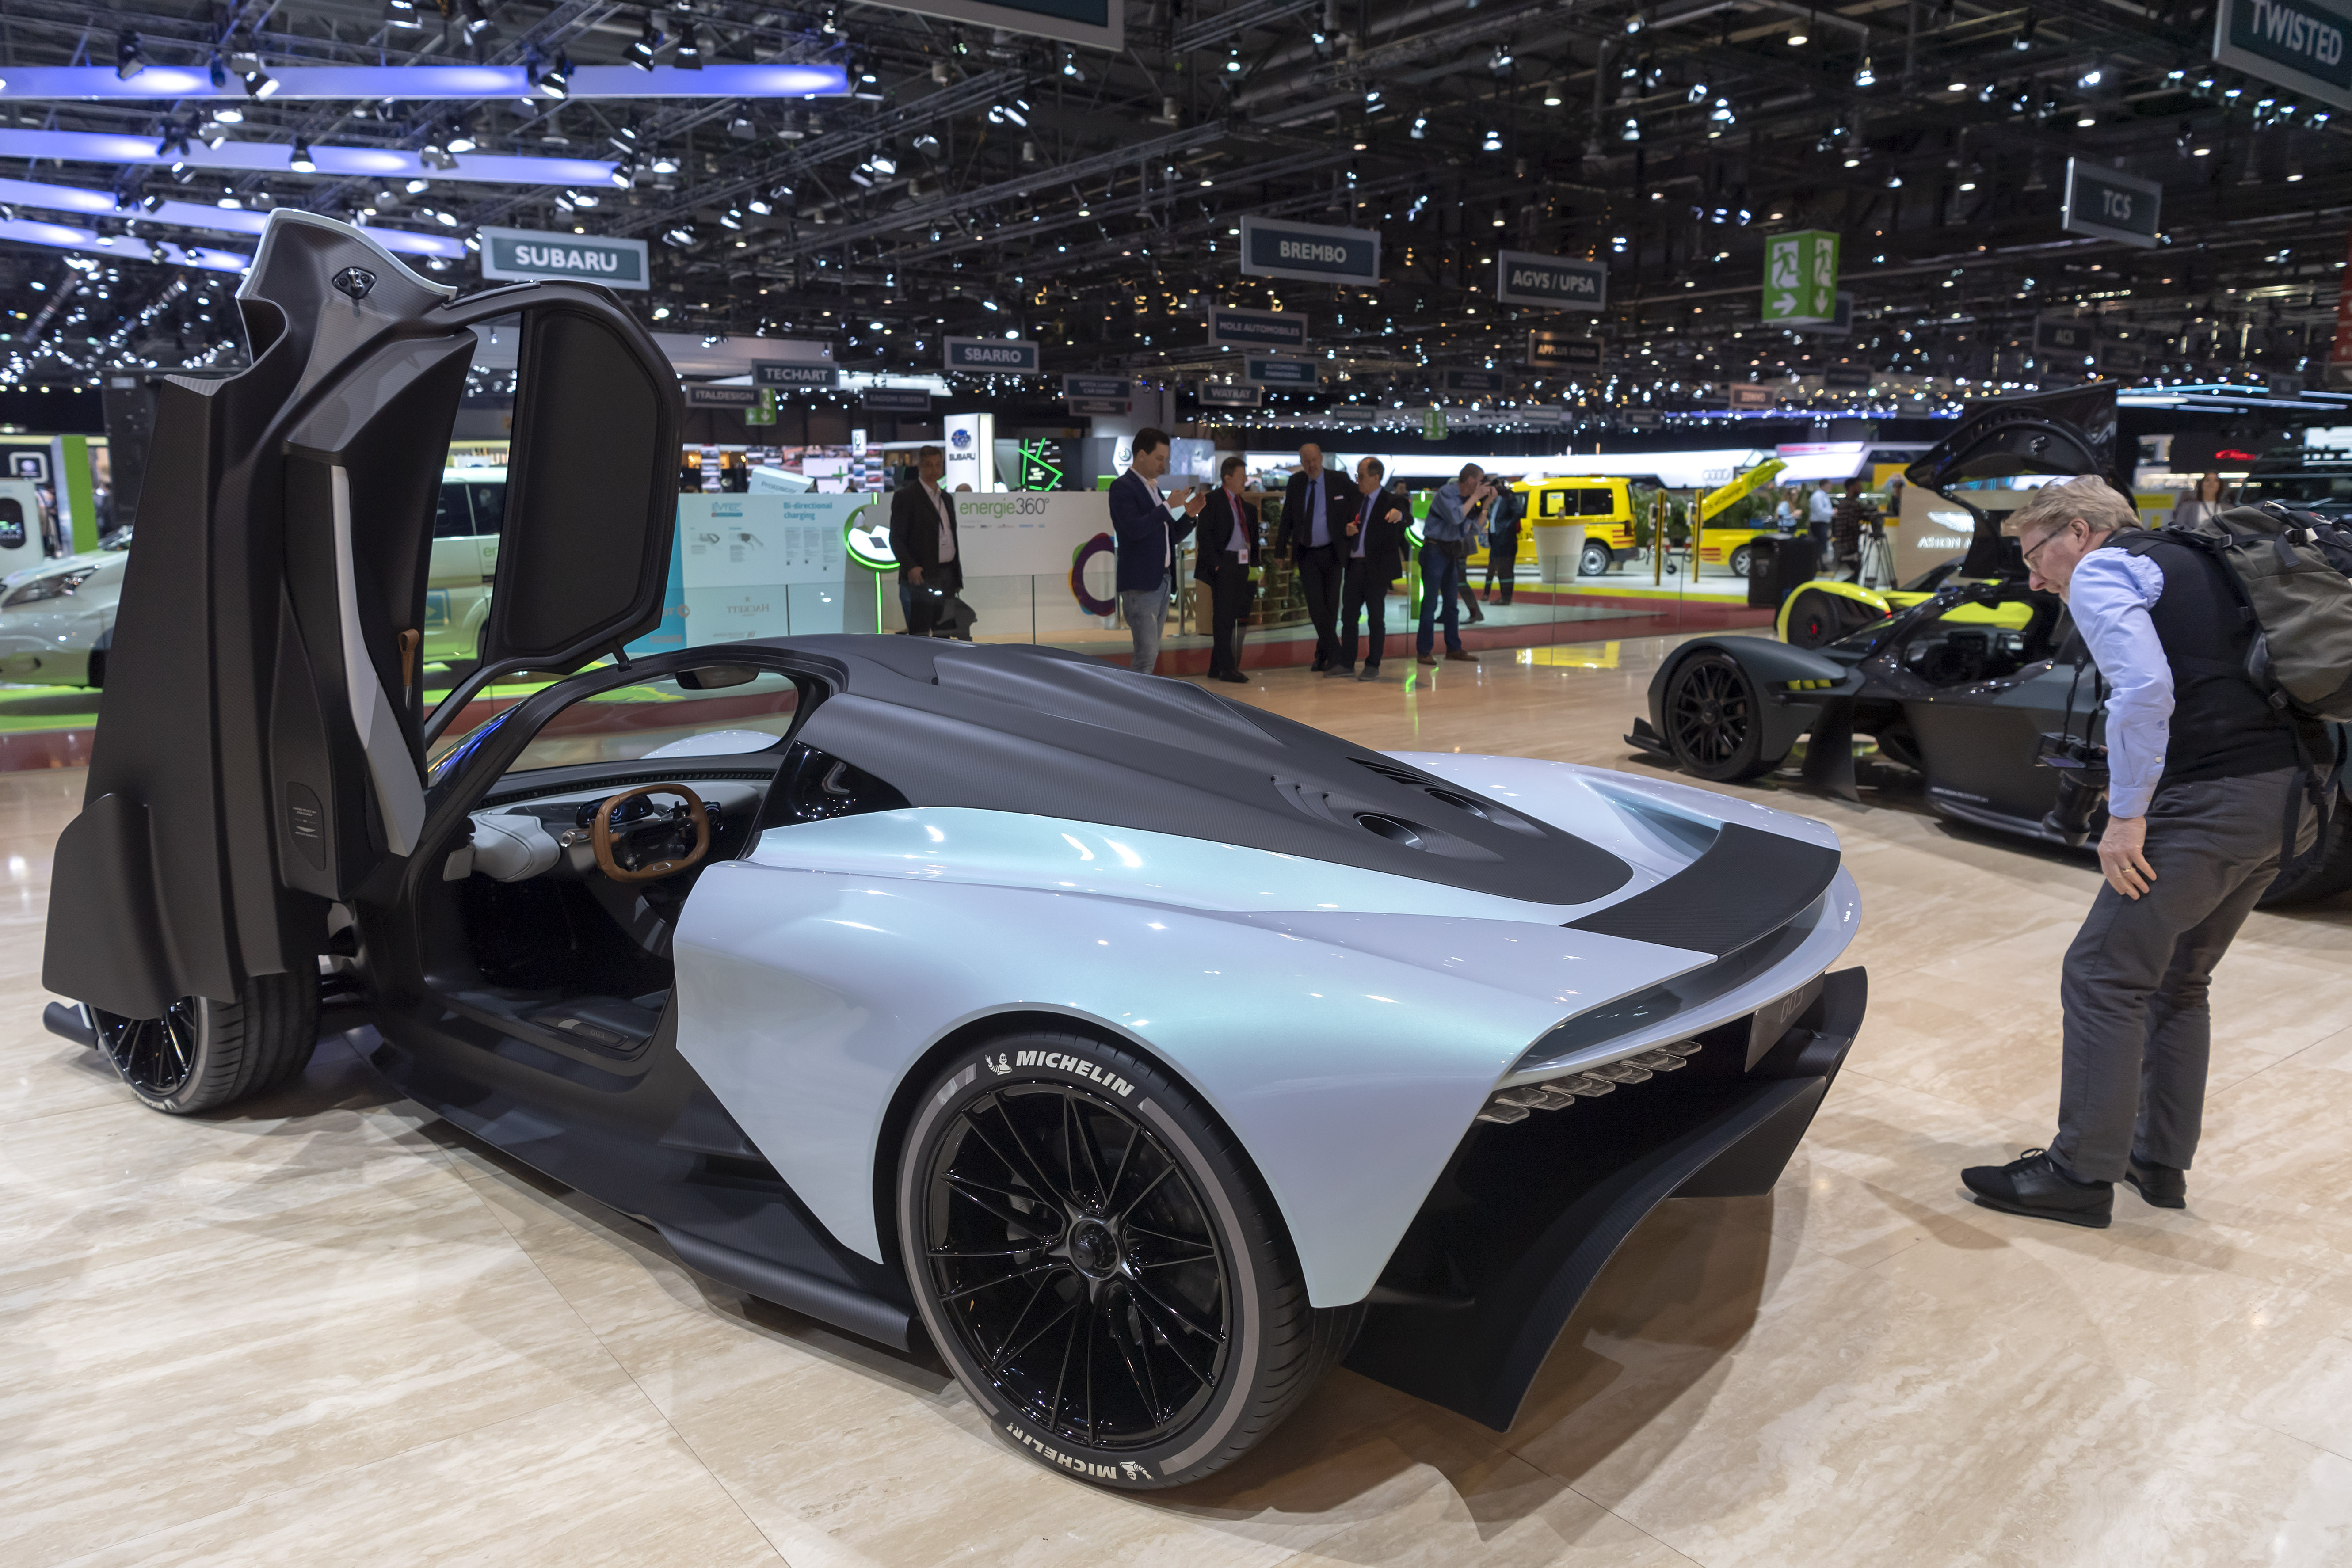 Looking is free: High-end rides abundant at Geneva auto show